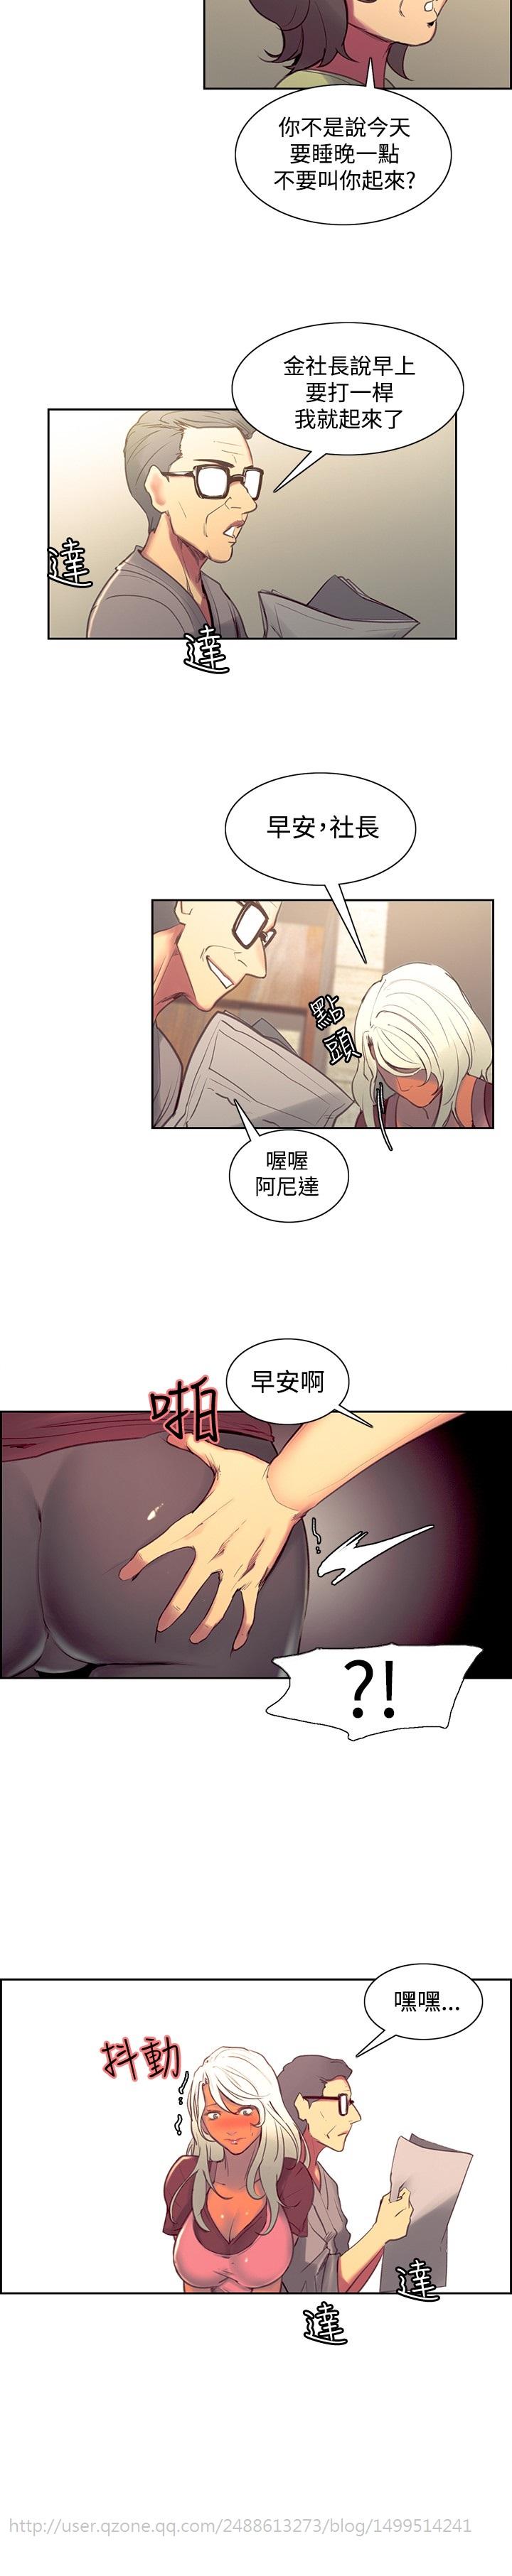 [Serious] Domesticate the Housekeeper 调教家政妇 Ch.29~44END [Chinese]中文 127